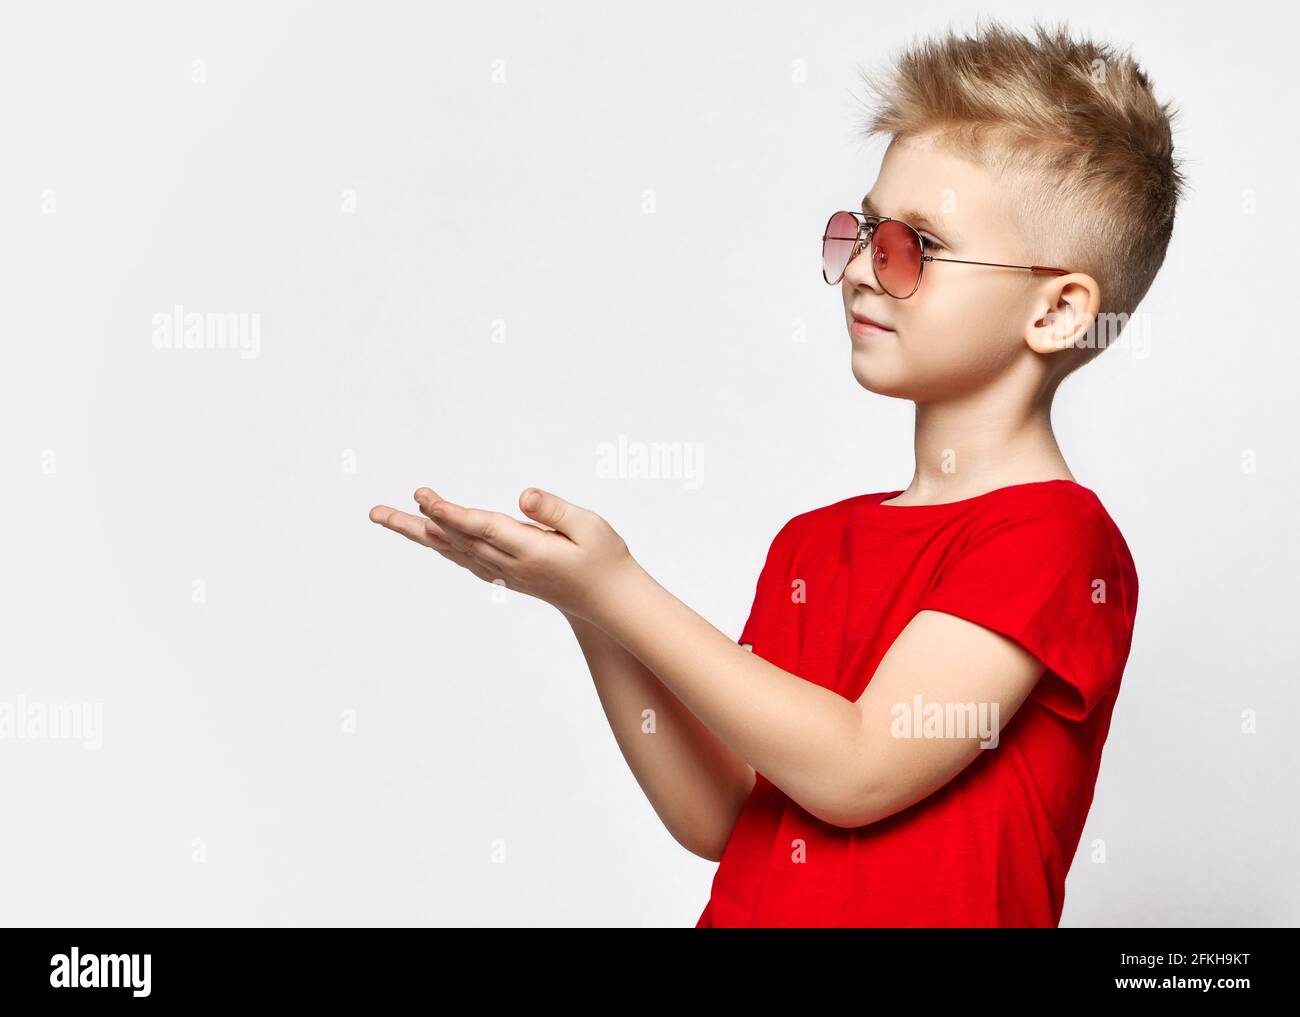 Portrait of blonde kid boy in red t-shirt and sunglasses standing holding hands up with open palms, holding blank space Stock Photo